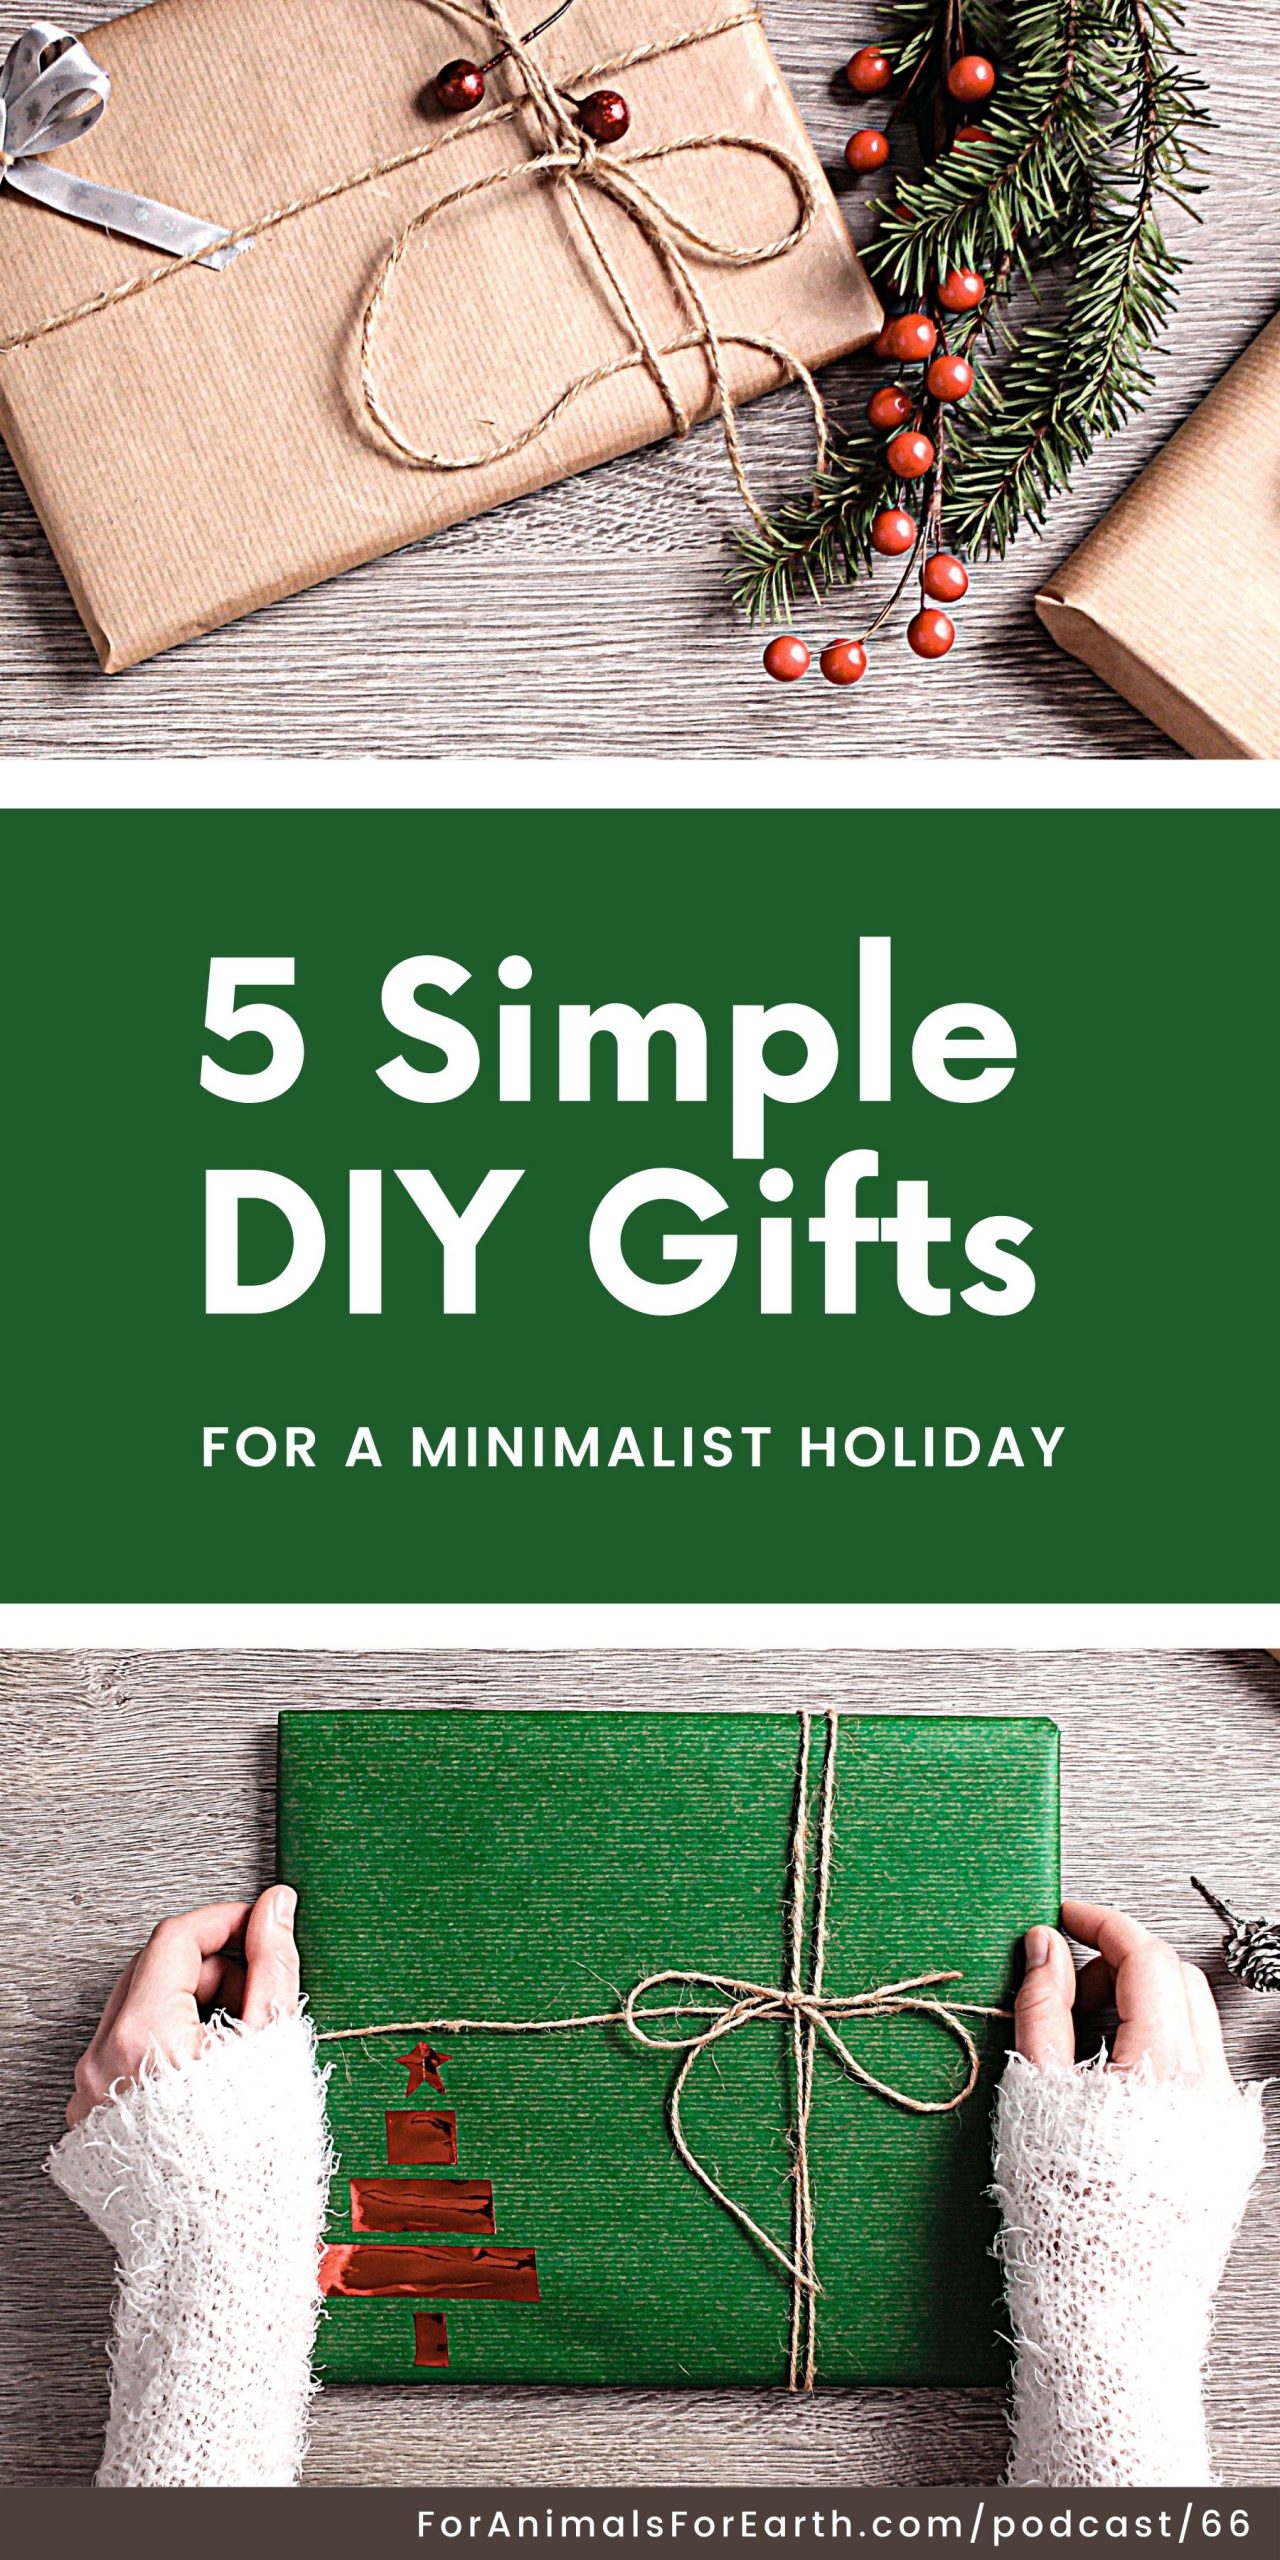 Tis' the season for gift-giving, and I've come up with 5 DIY minimalist gift ideas for your earth and animal-loving friends.